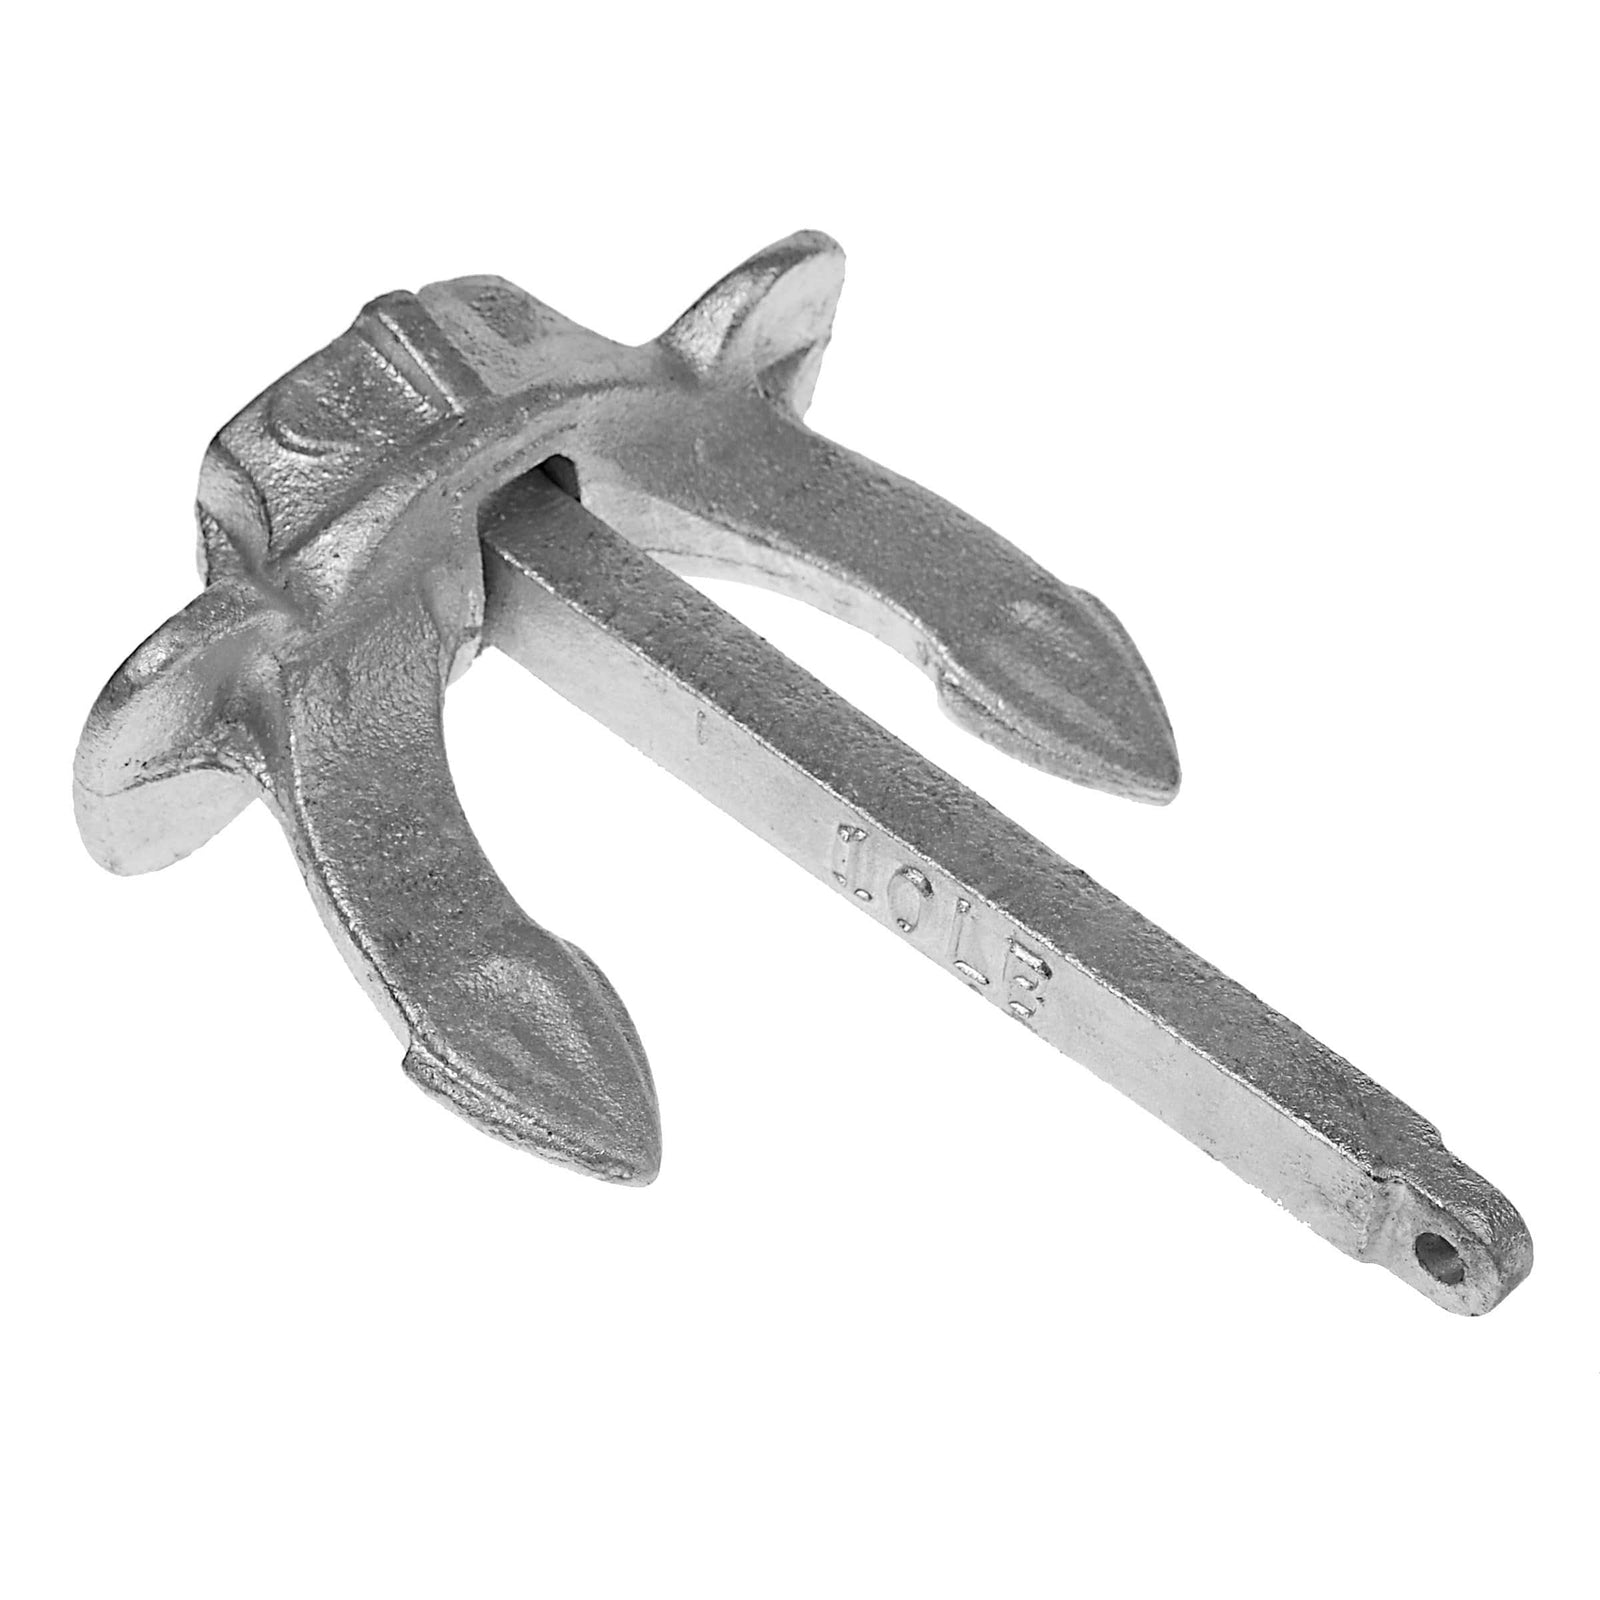 Cast Iron Stockless Hall Boat Anchor, 10 lbs